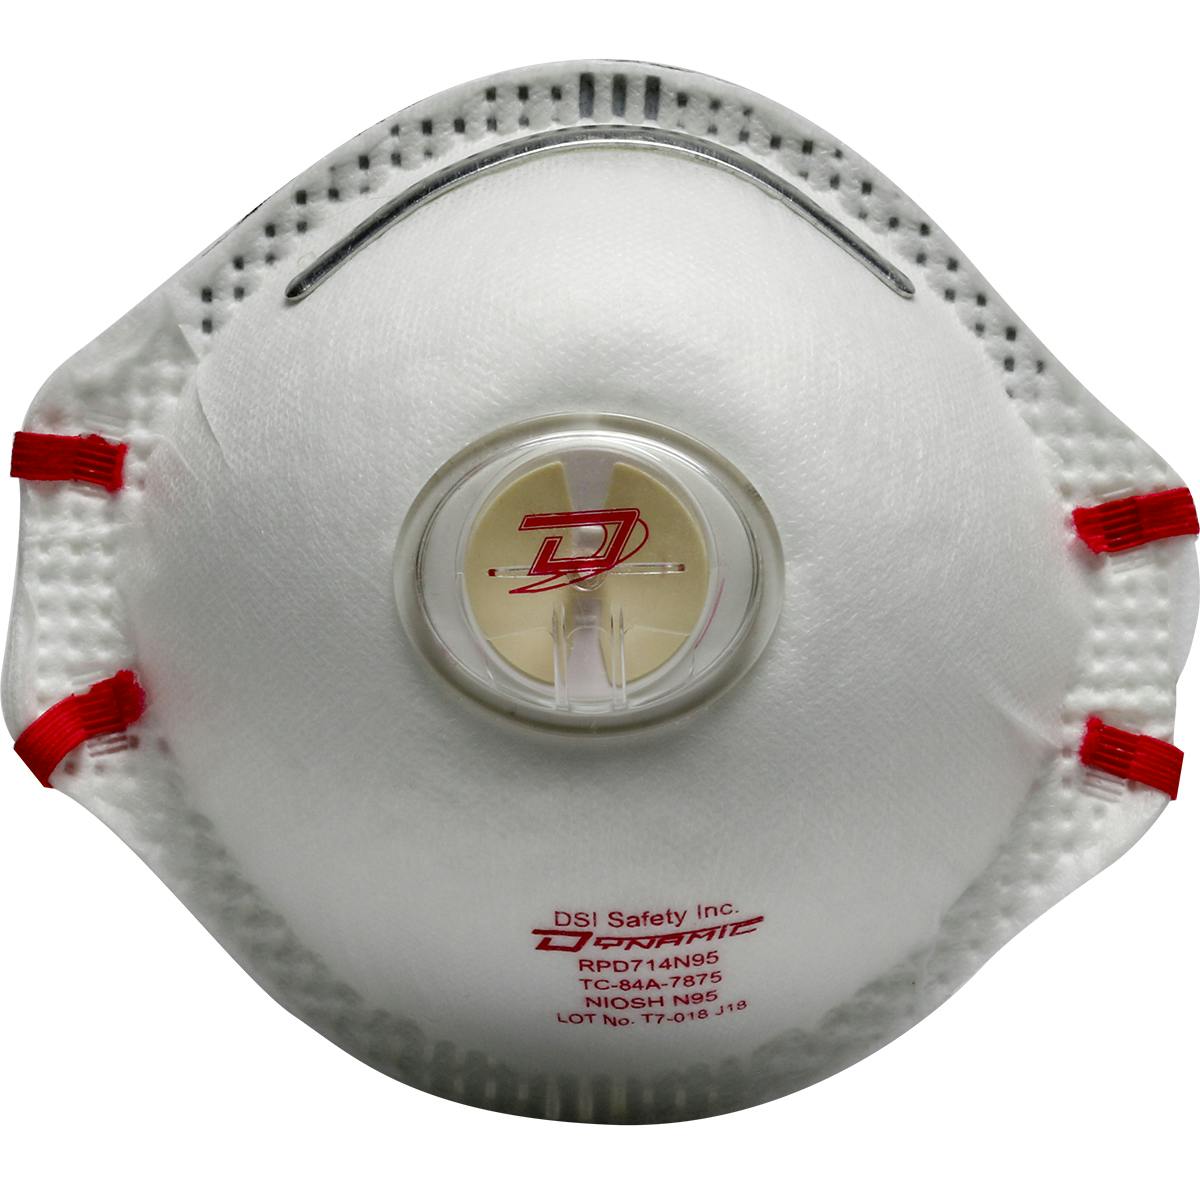 Deluxe N95 Disposable Respirator with Valve - 10 Pack, White (270-RPD714N95) - OS_1